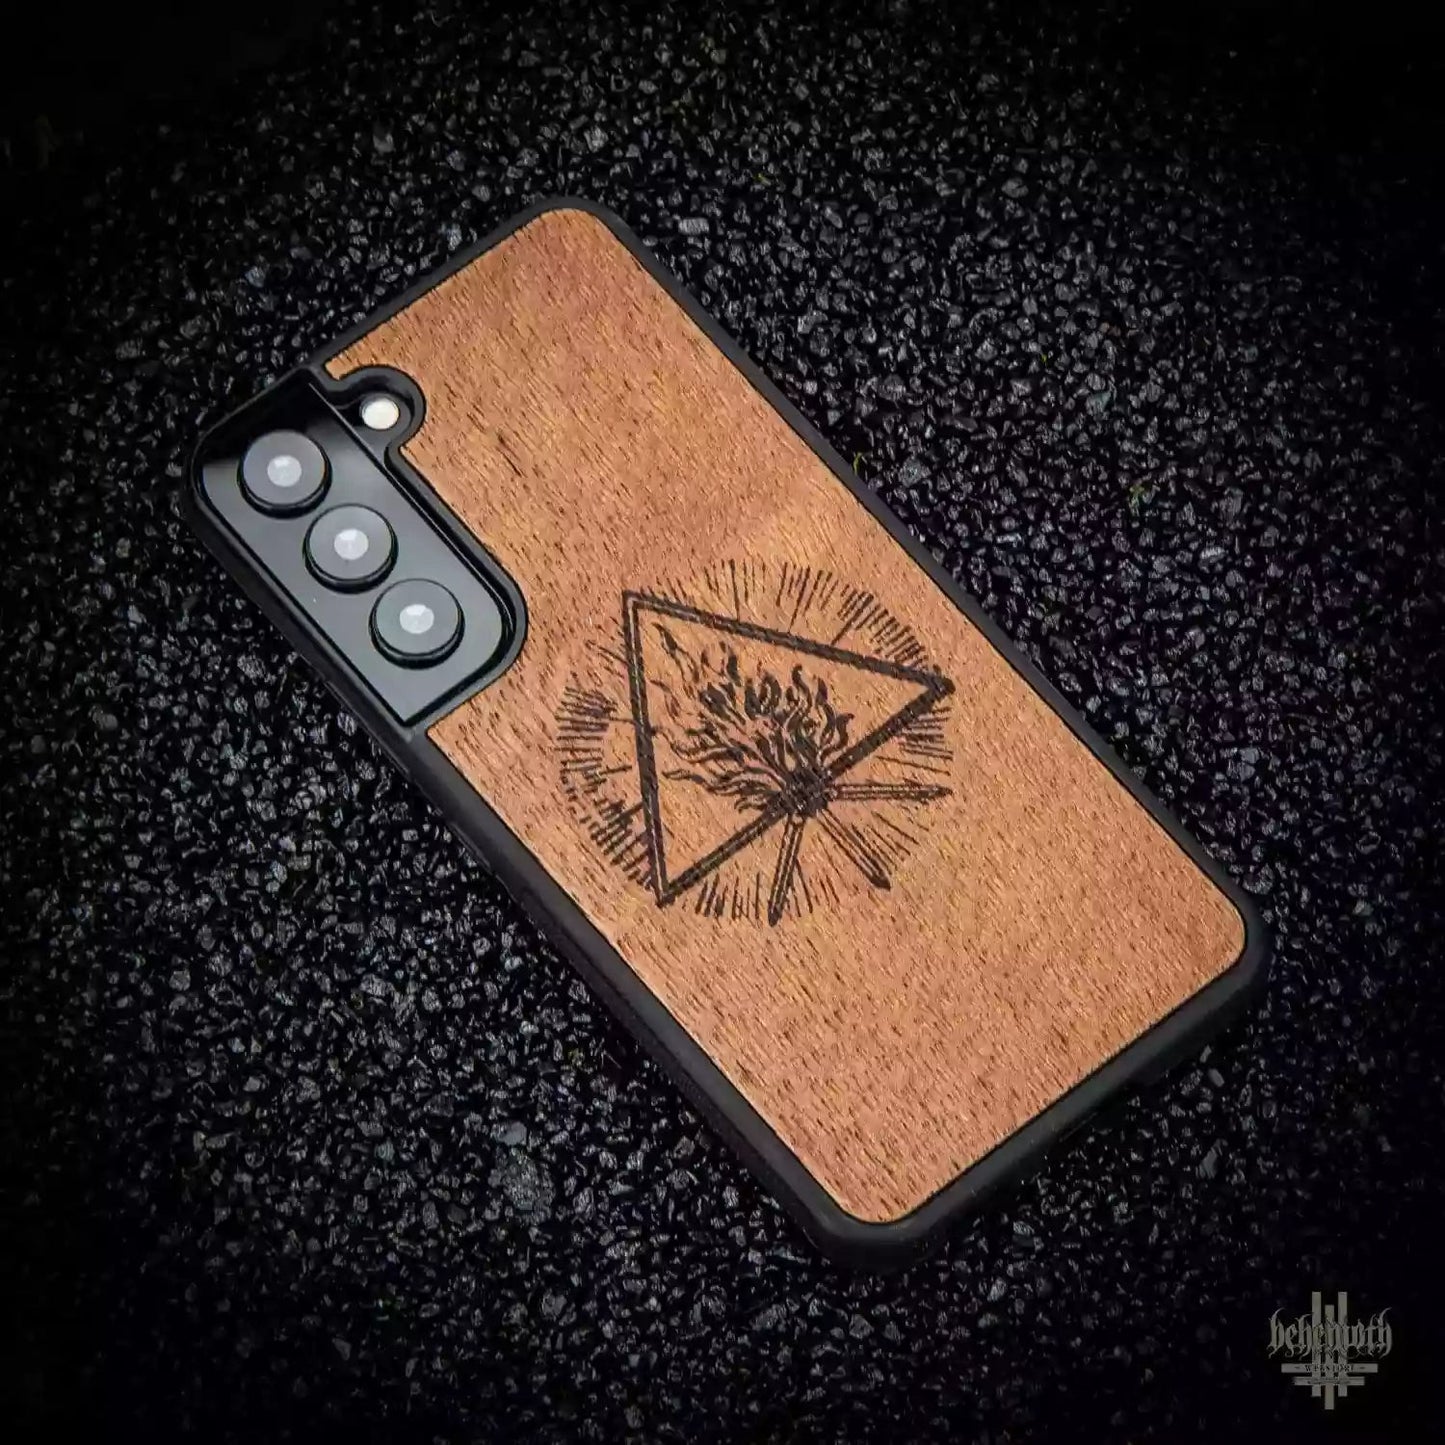 Samsung GalaxyS22 case with wood finishing and Behemoth 'The Unholy Trinity' logo